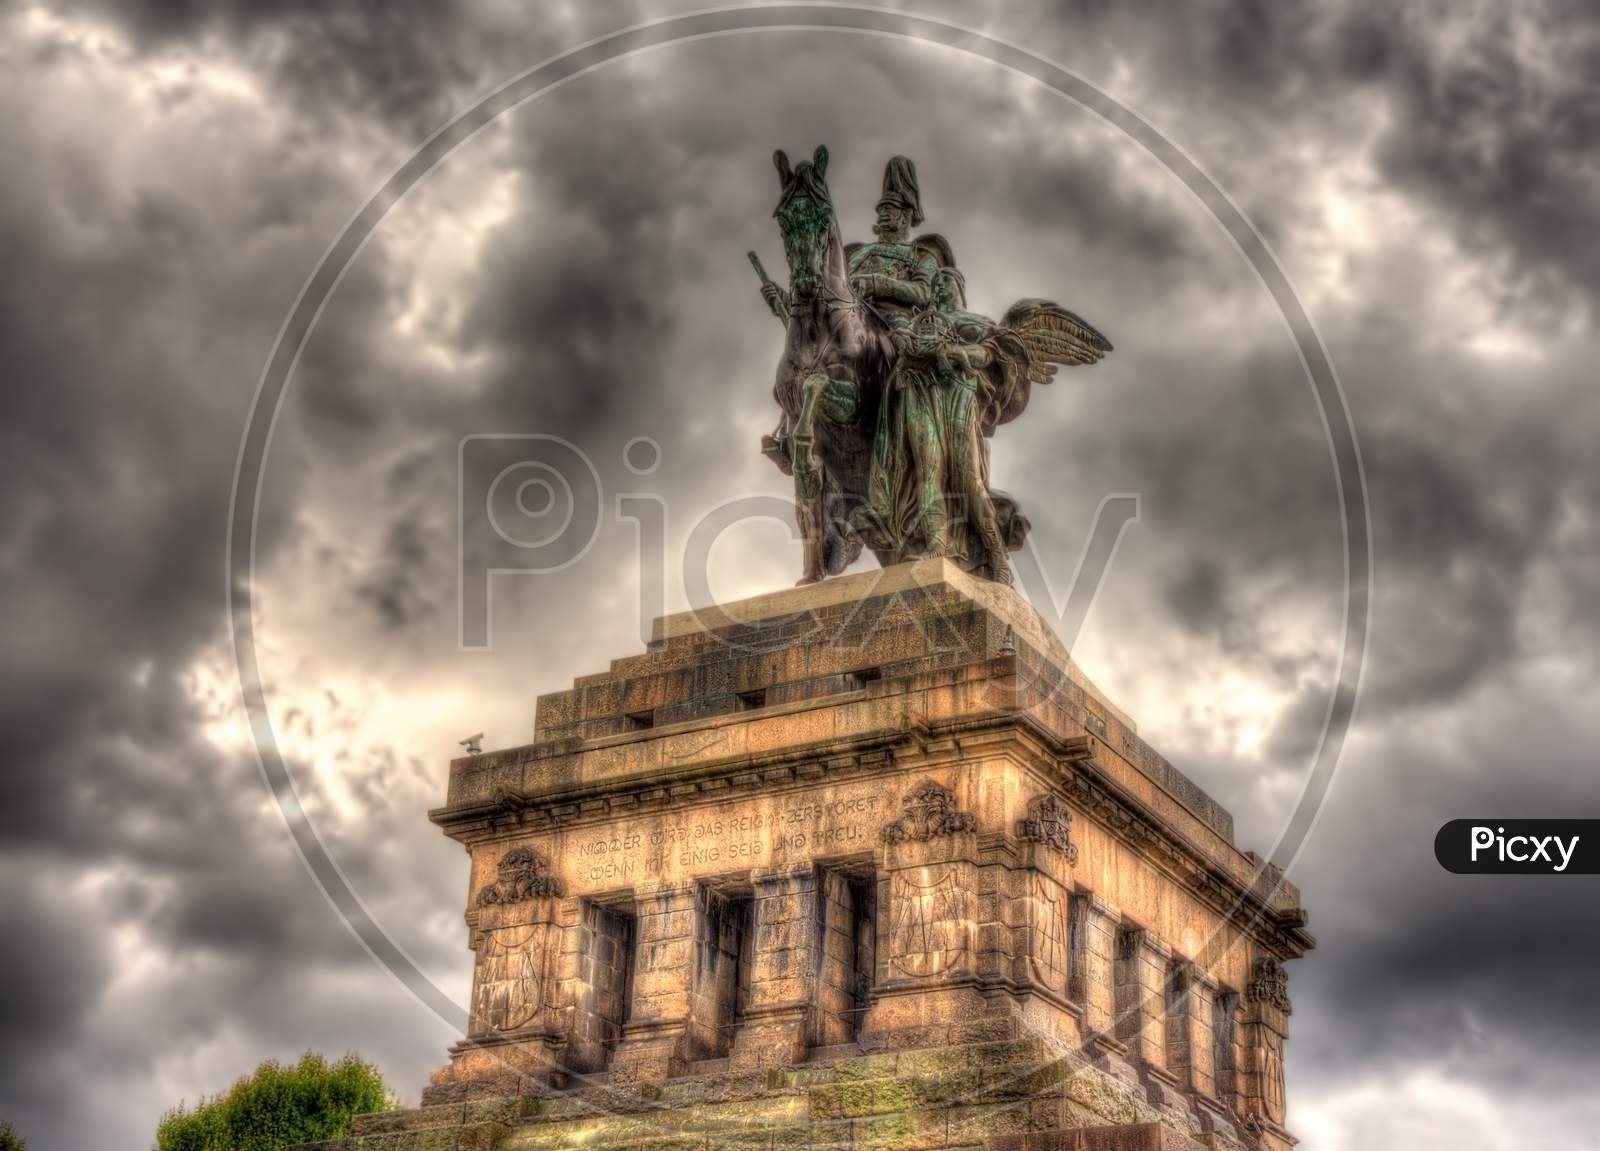 Statue Of William I In Koblenz, Germany